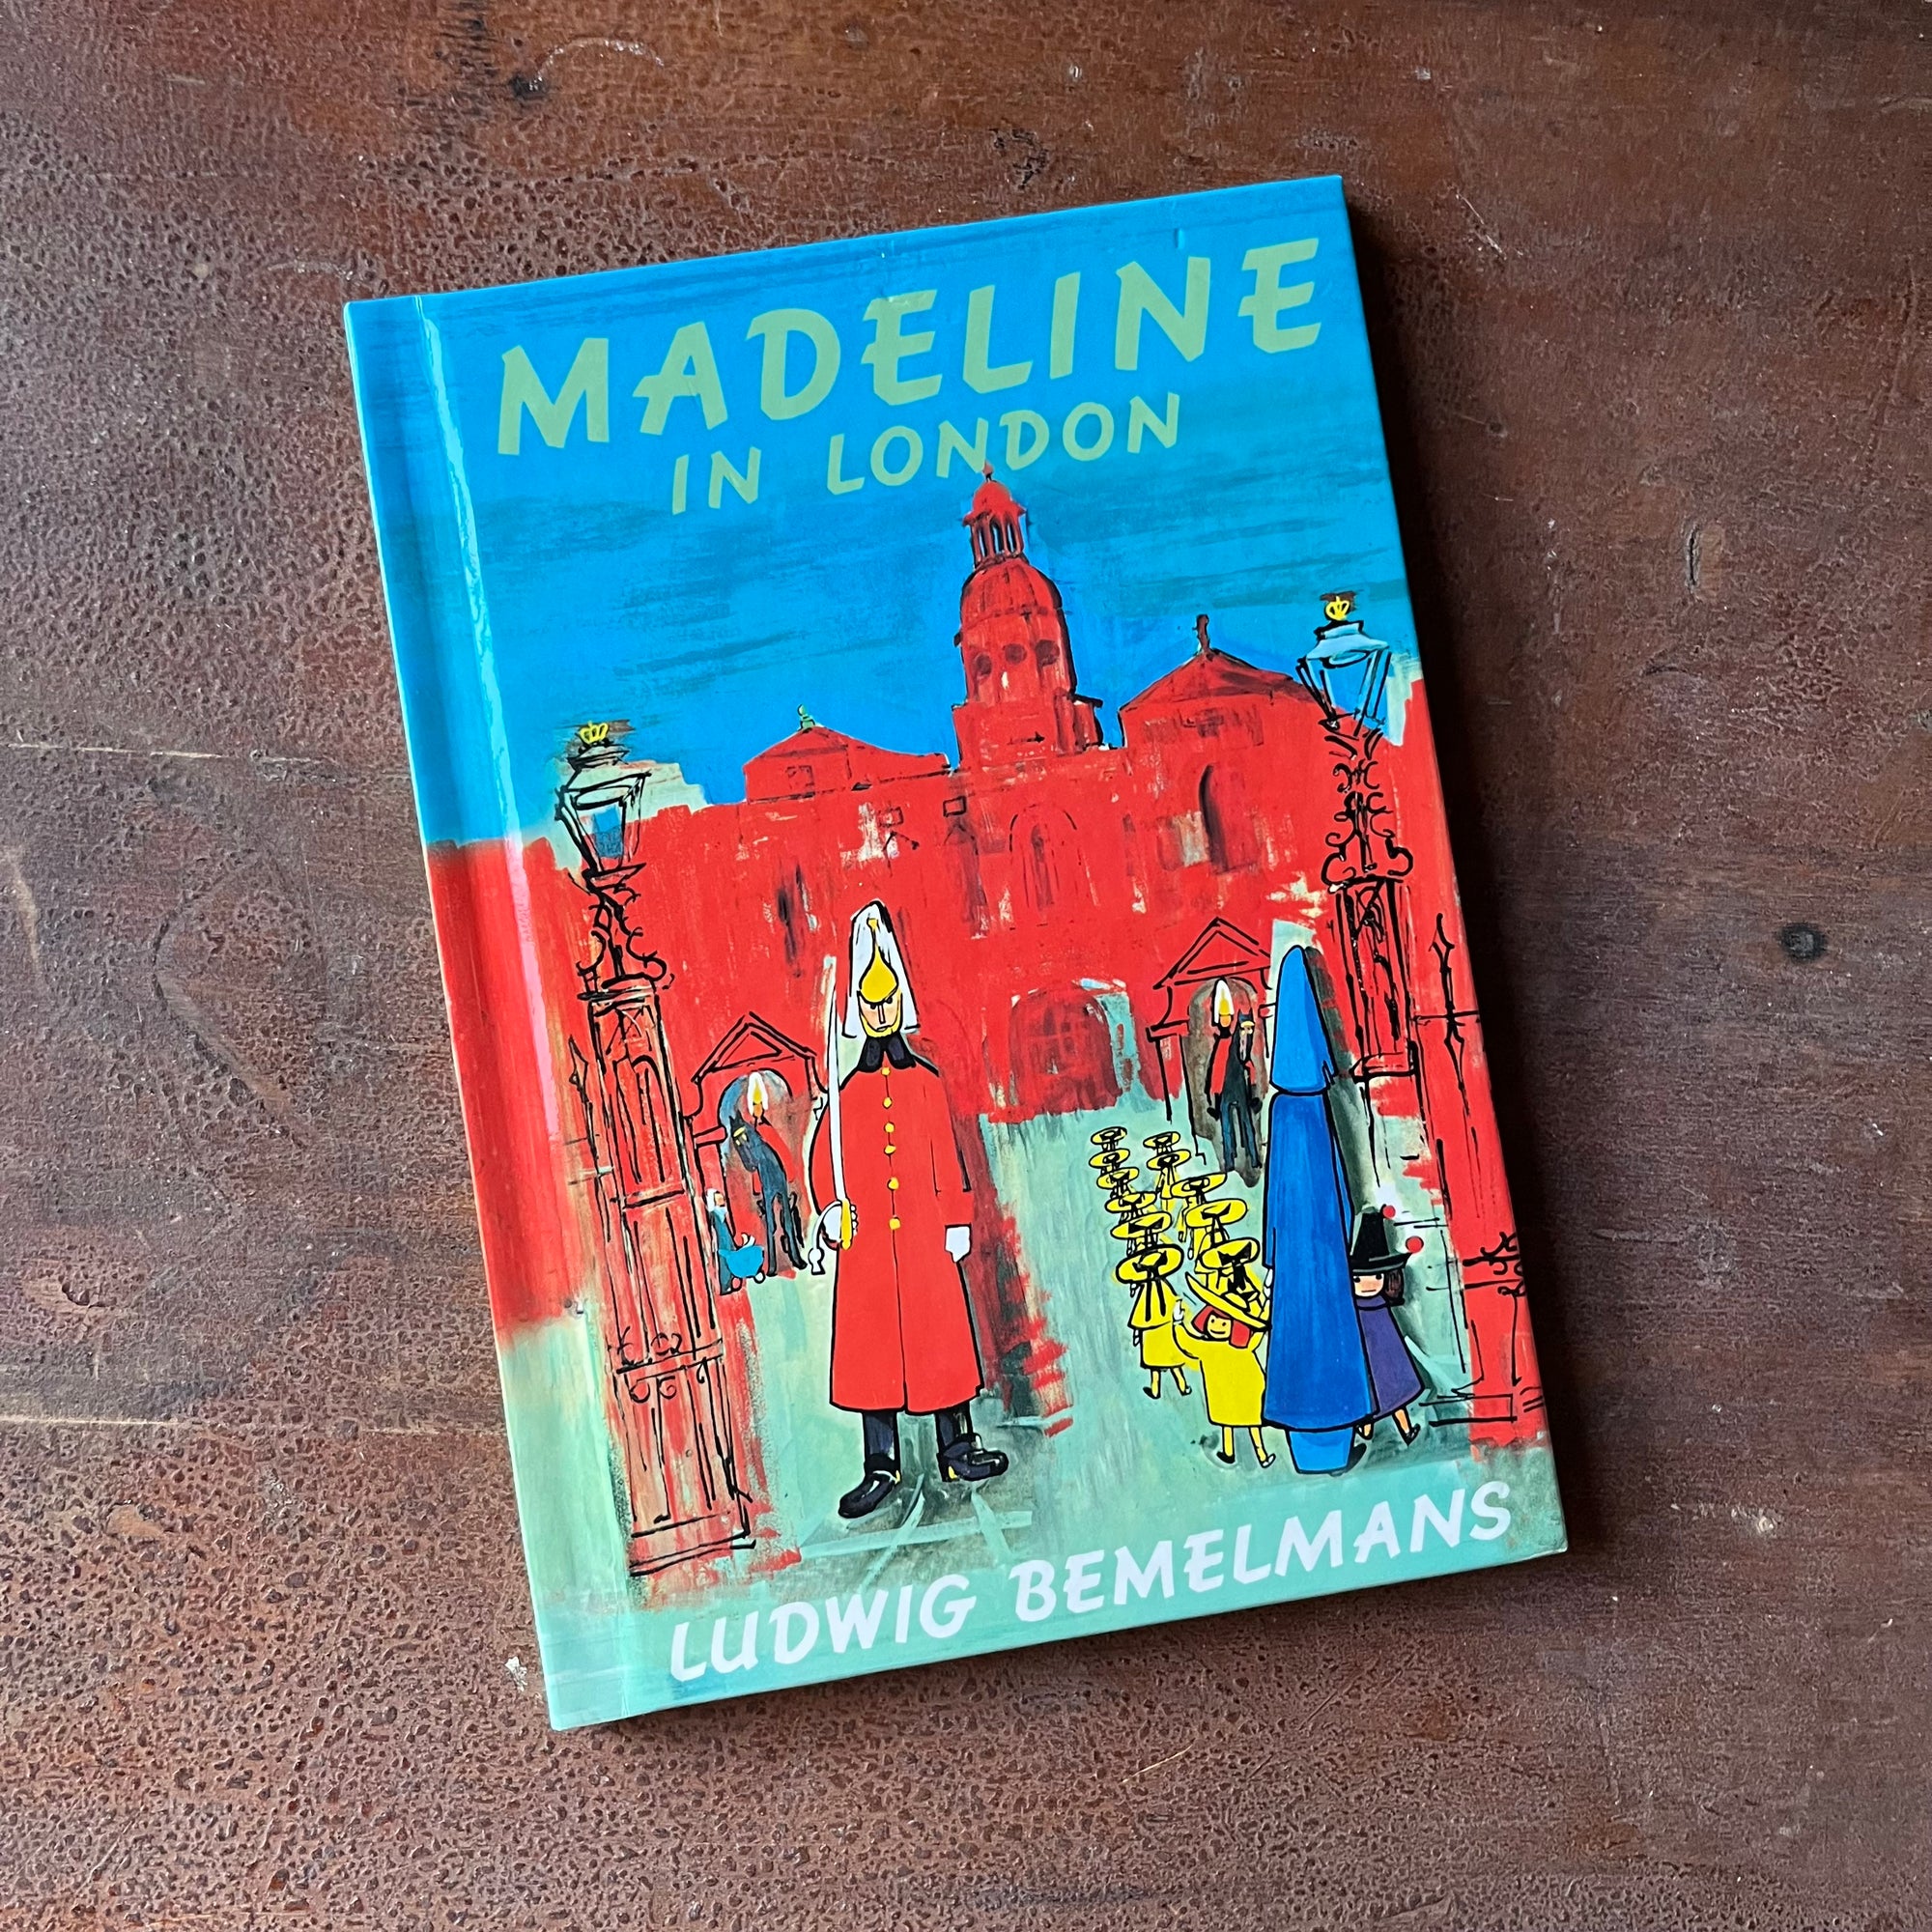 Log Cabin Vintage - children's books, vintage children's books, picture book - Madeline by Ludwig Bemelmans a 2003 Weekly Reader Edition - view of the front cover